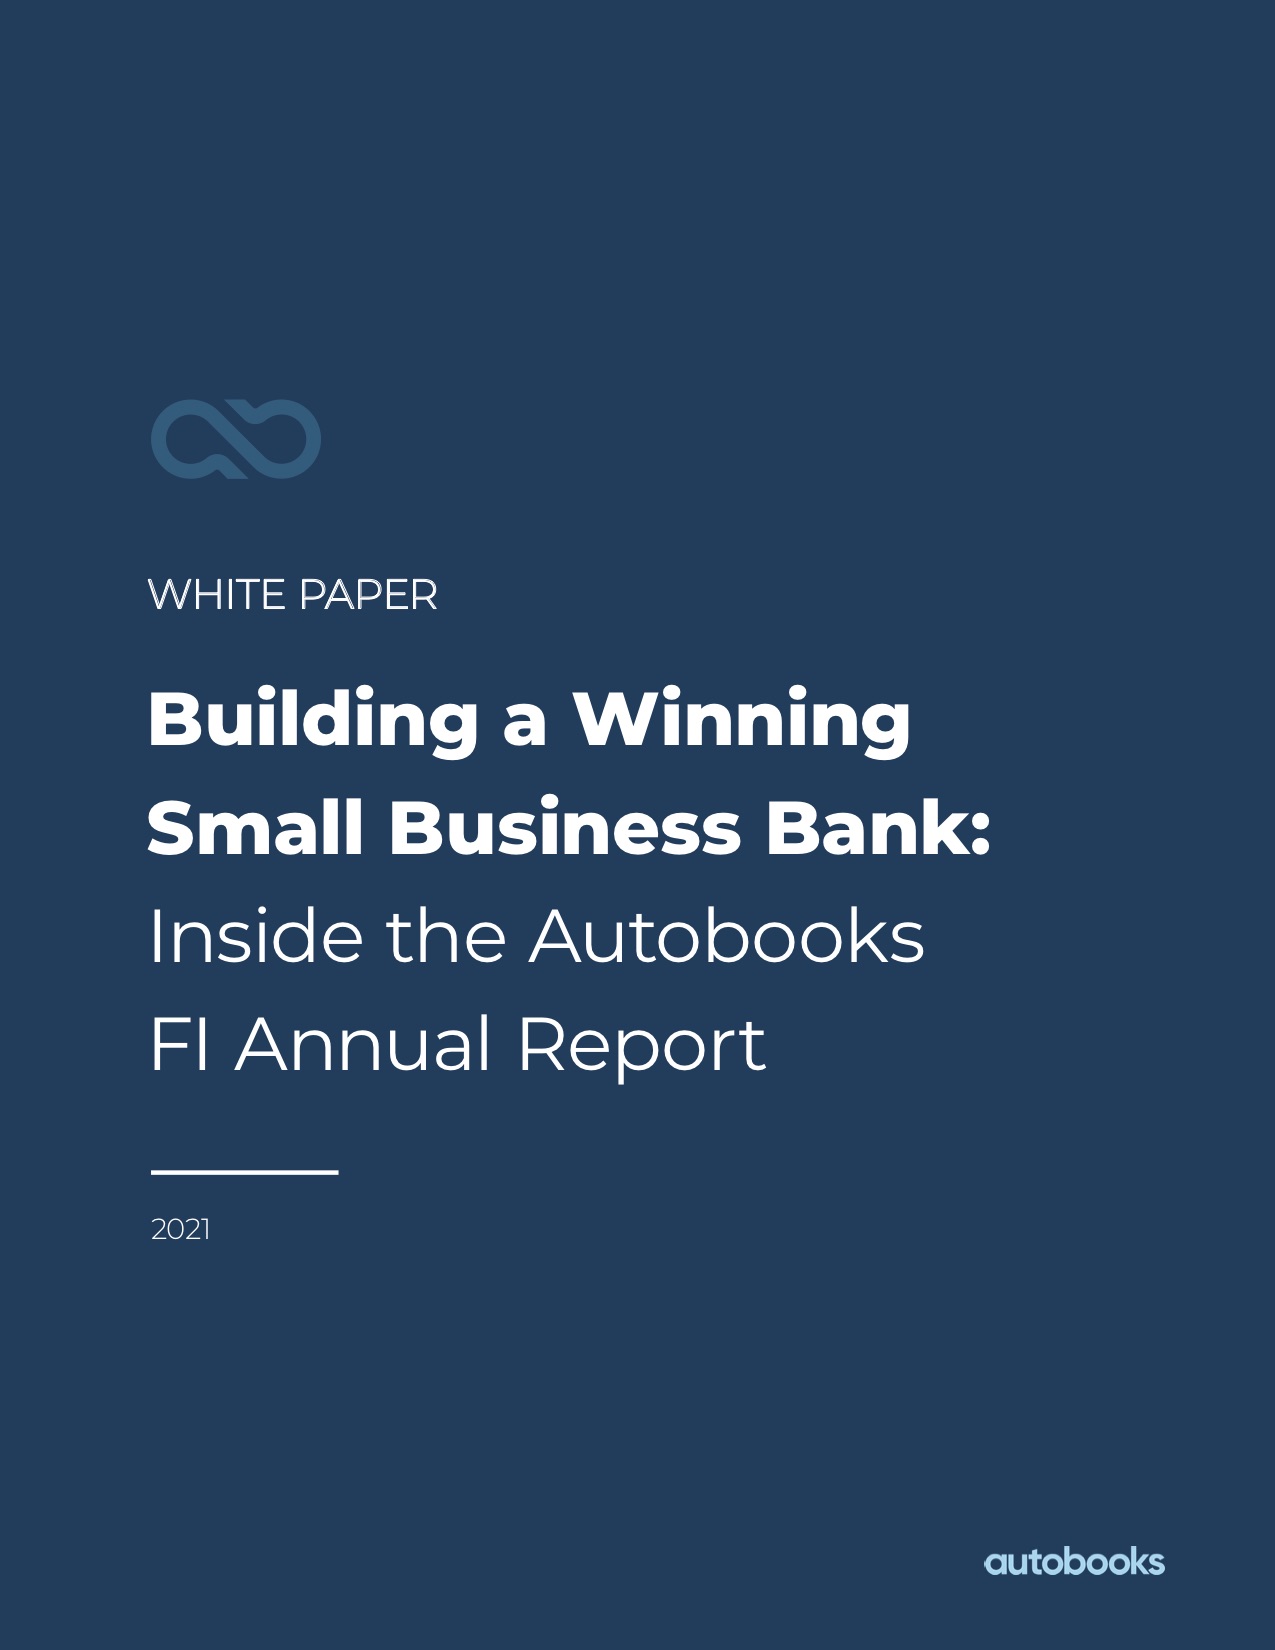 autobooks white paper on building a winning small business bank